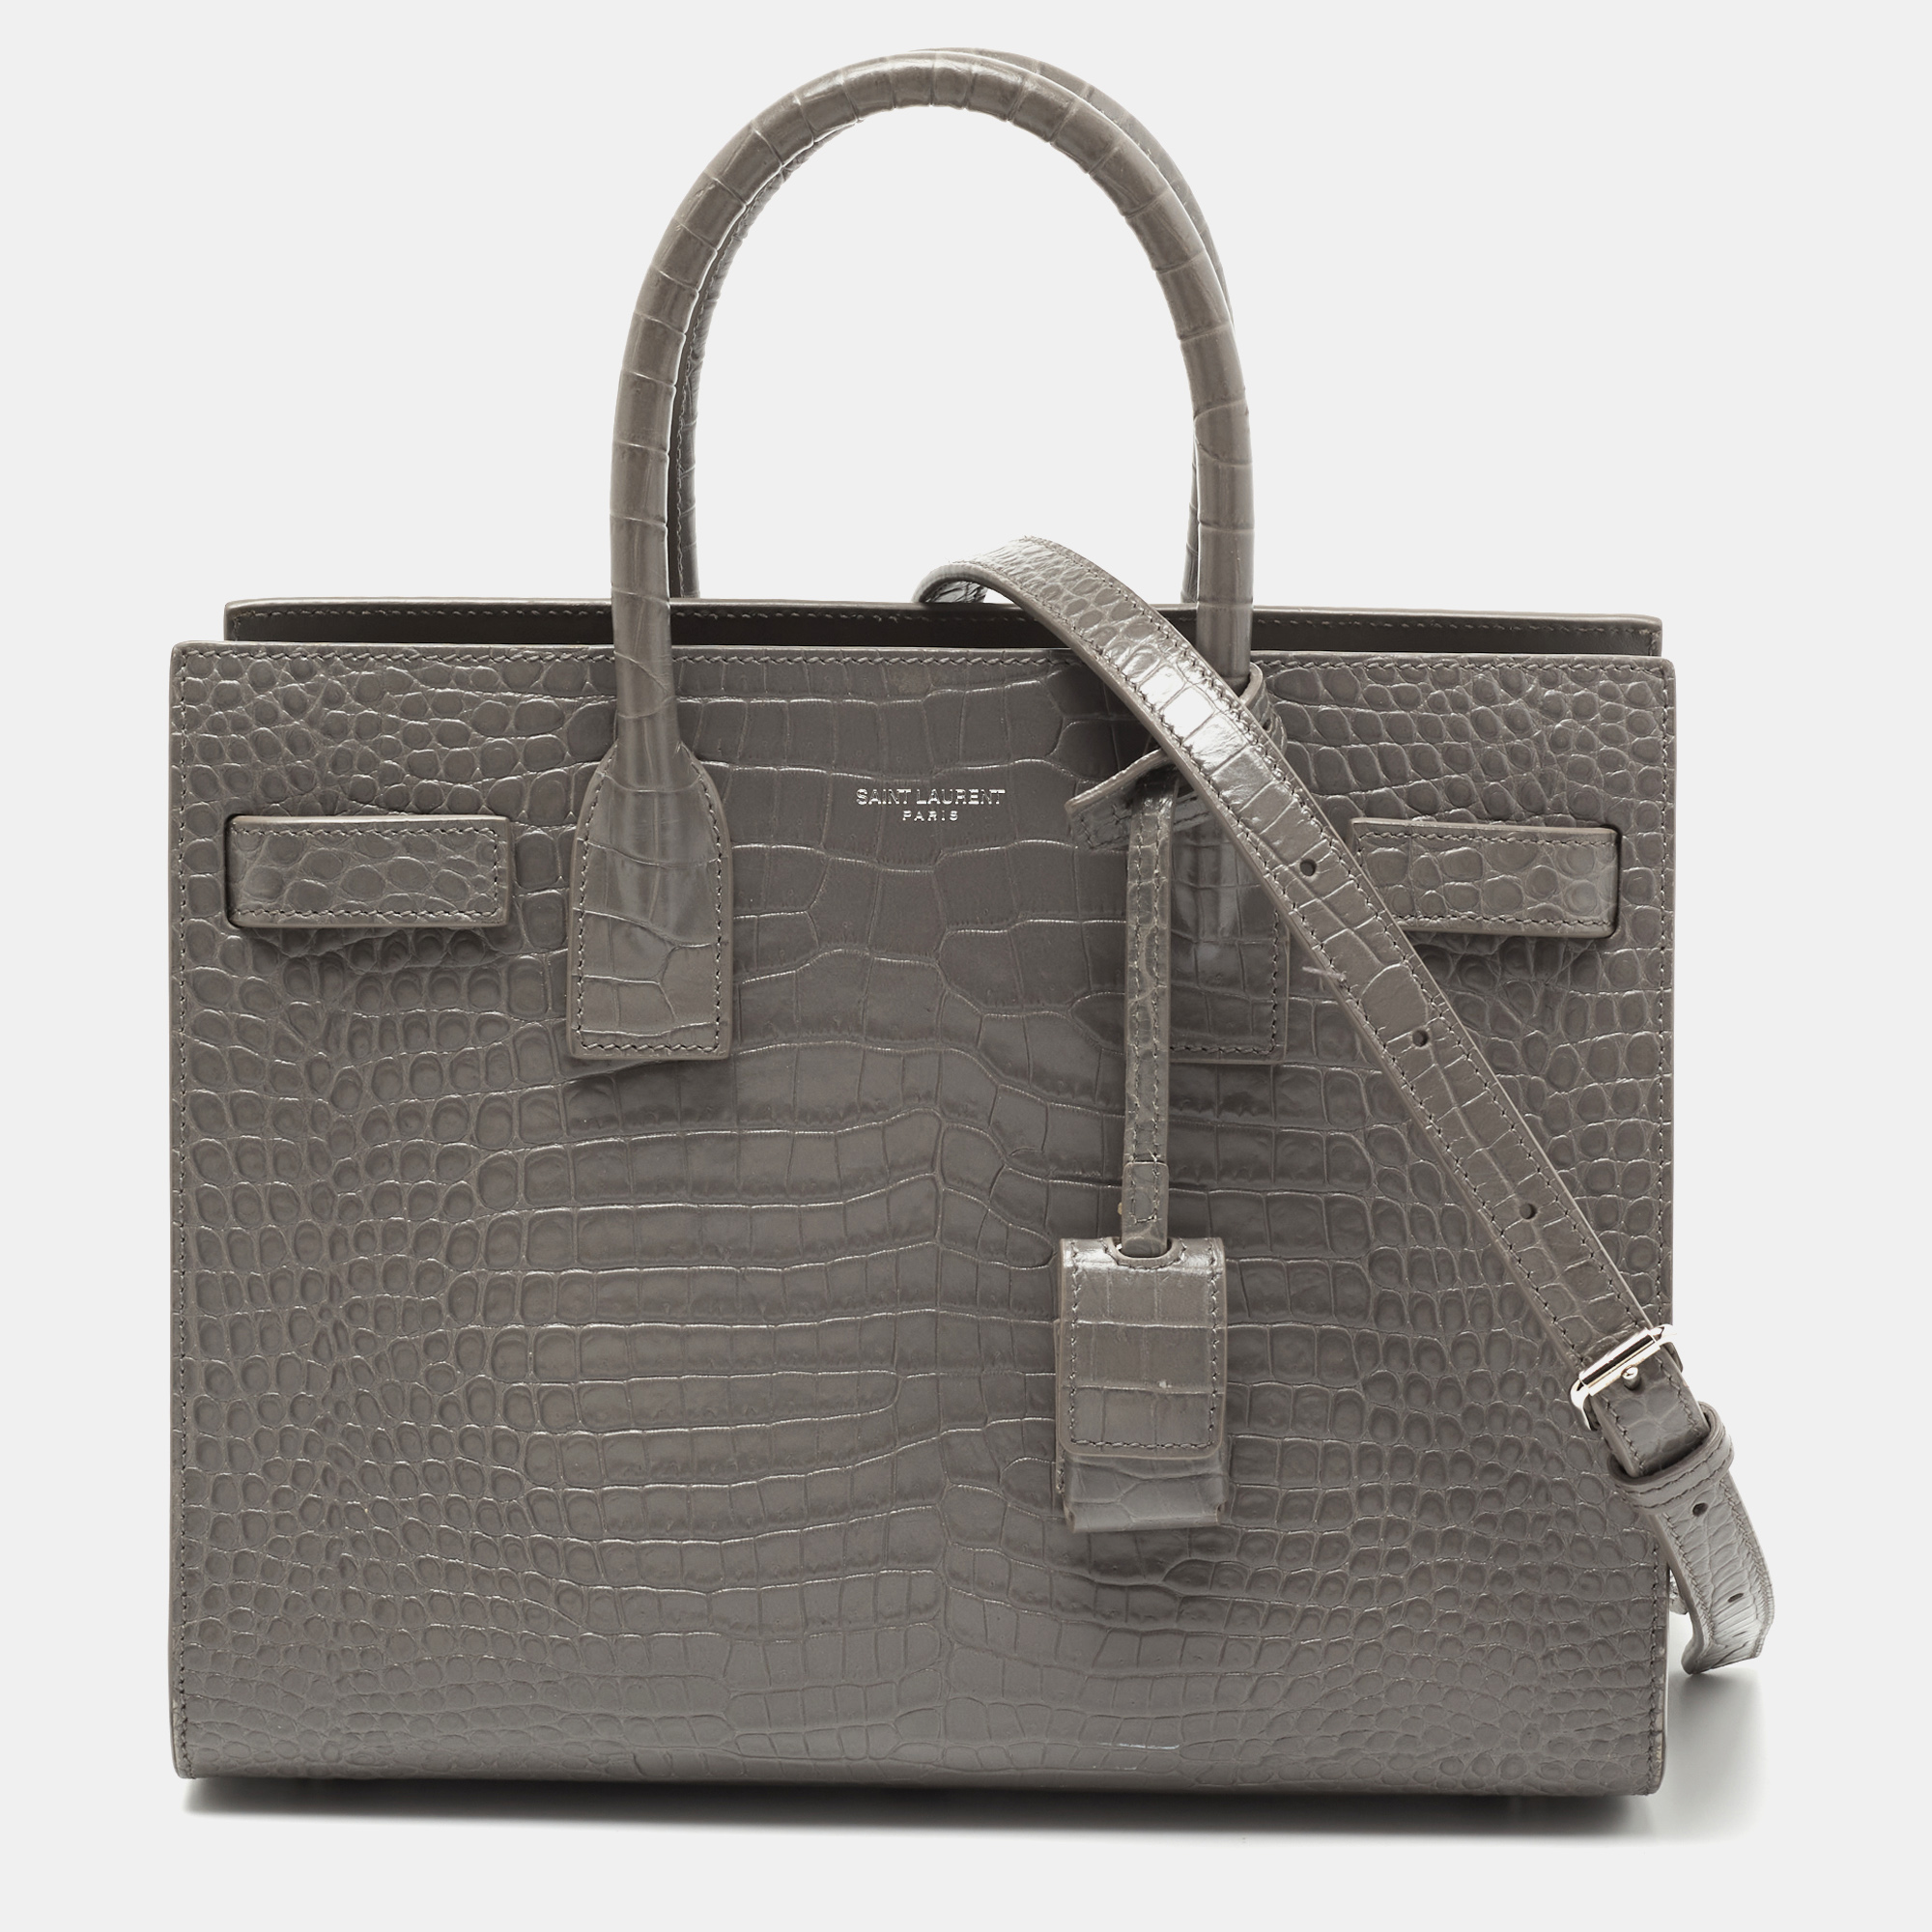 Pre-owned Saint Laurent Grey Croc Embossed Leather Baby Classic Sac De Jour Tote